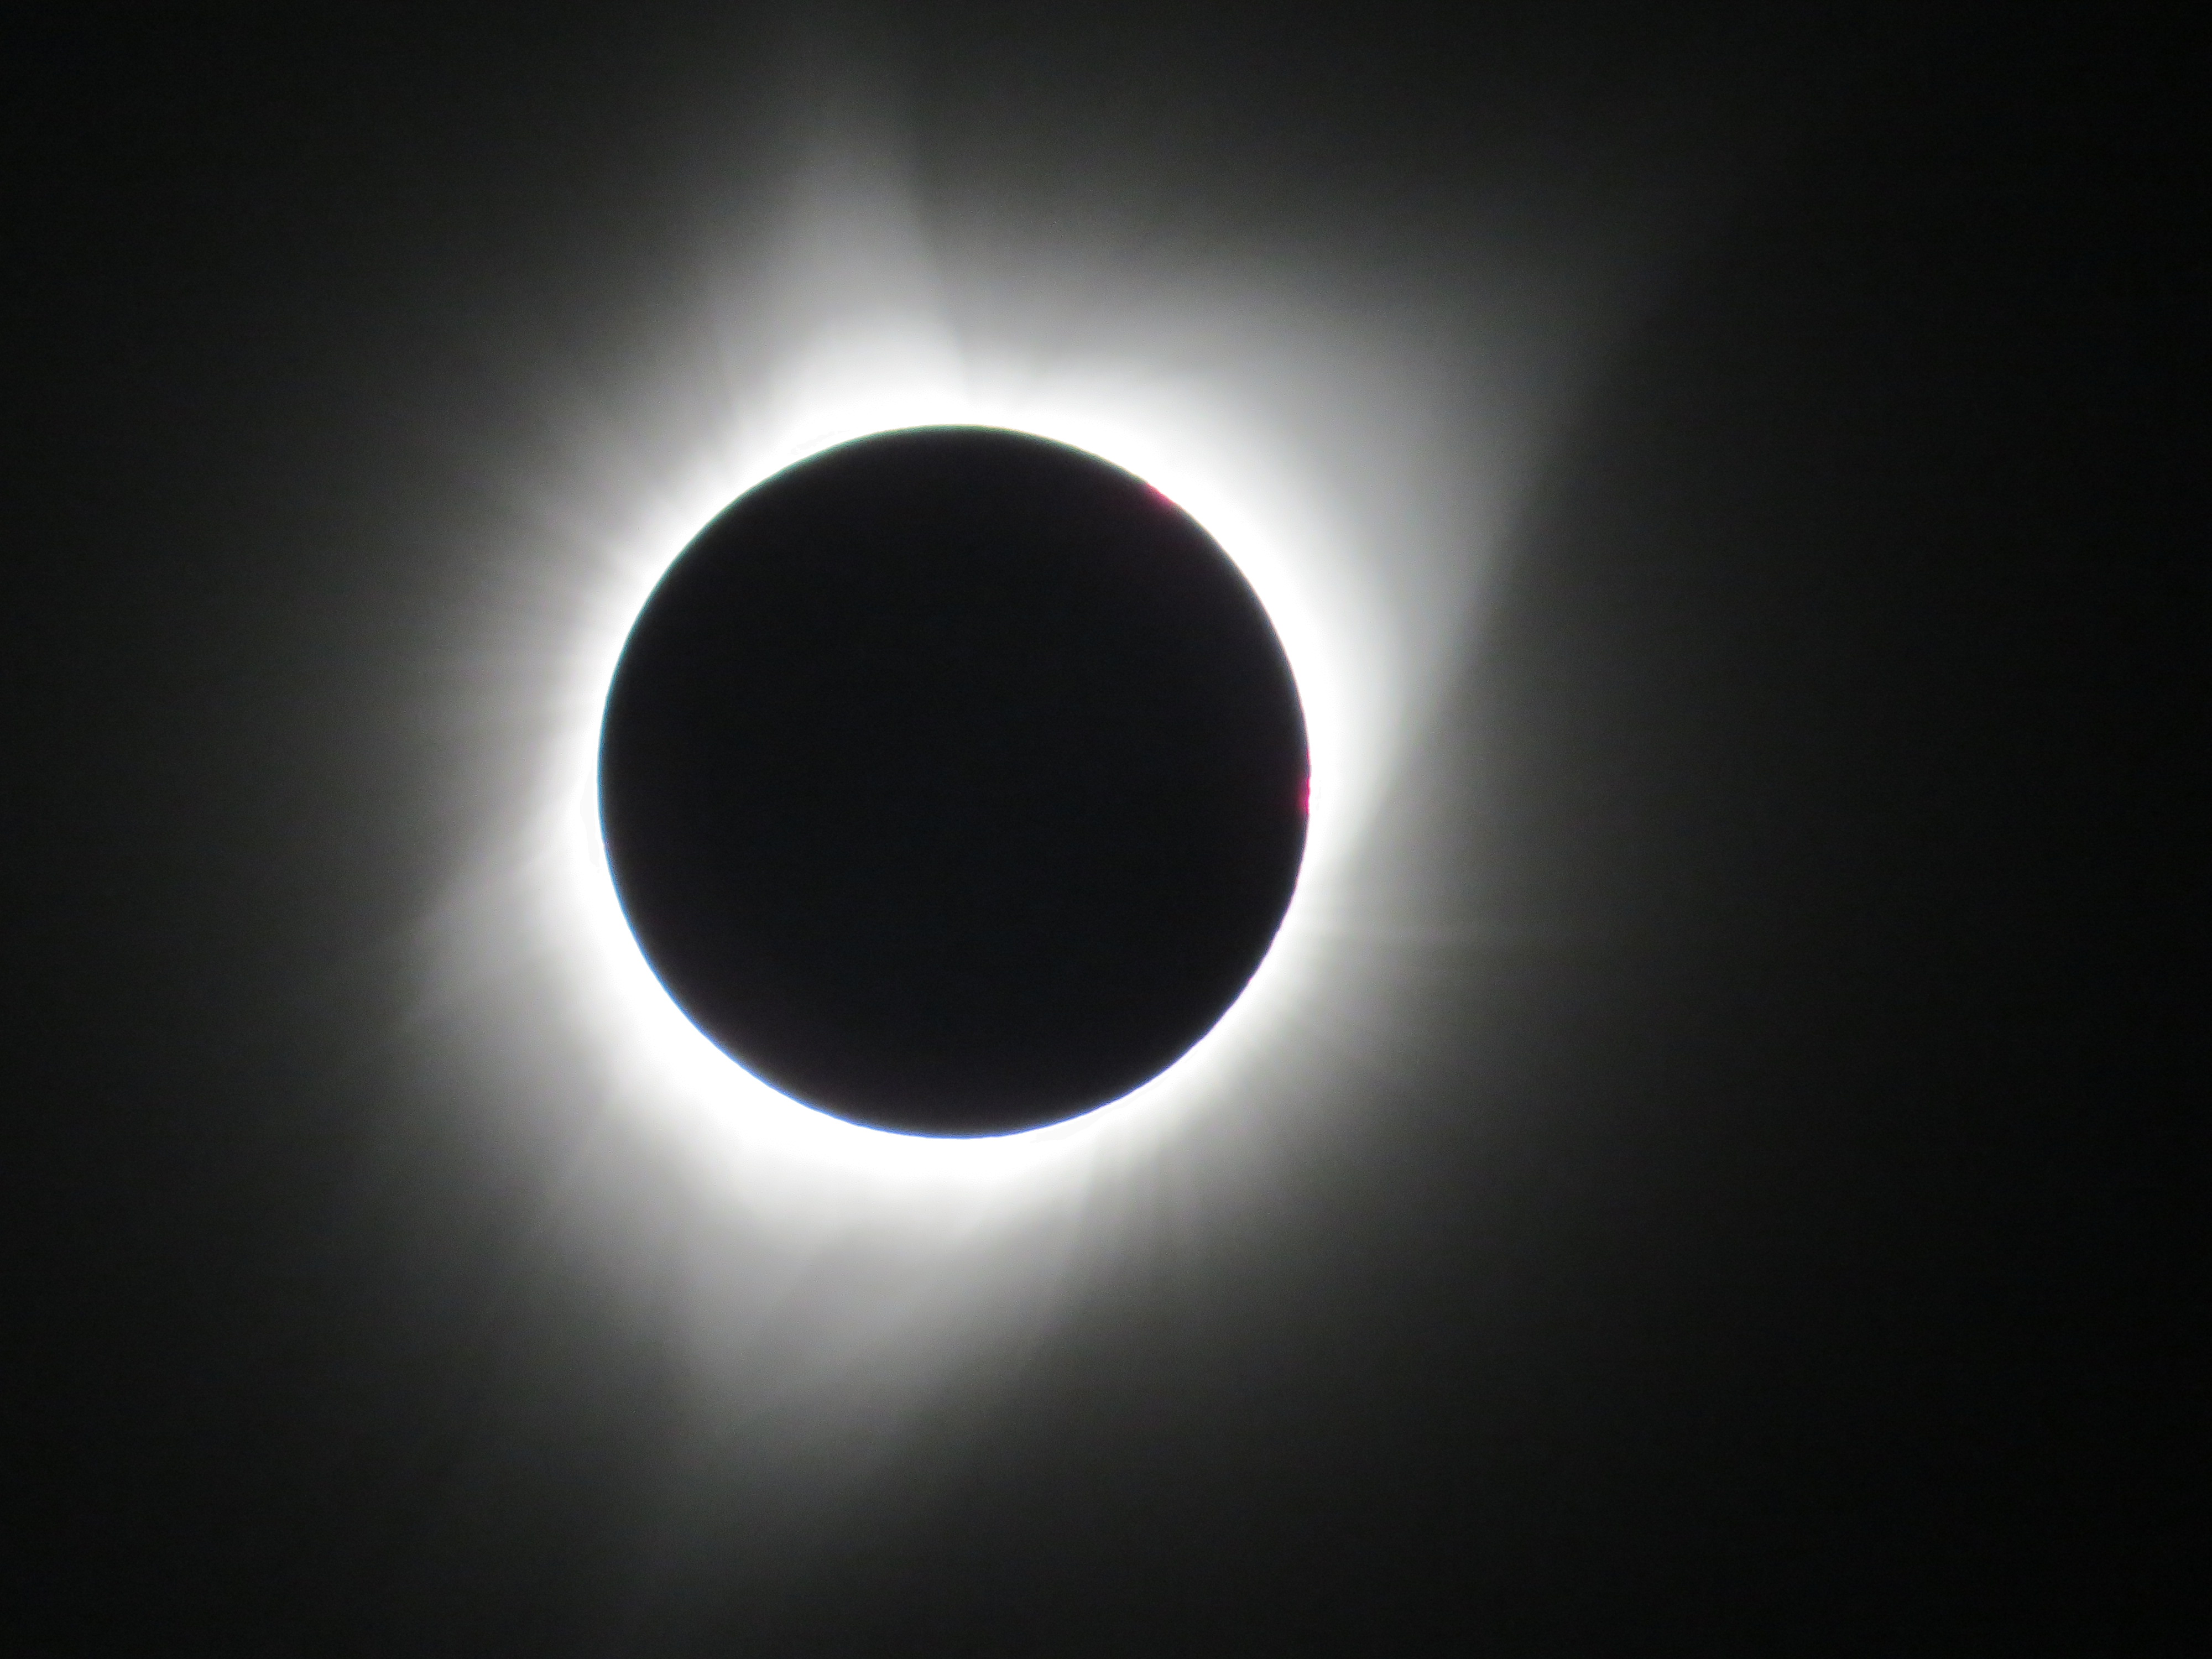 Solar eclipse of August 21, 2017 - Wikipedia